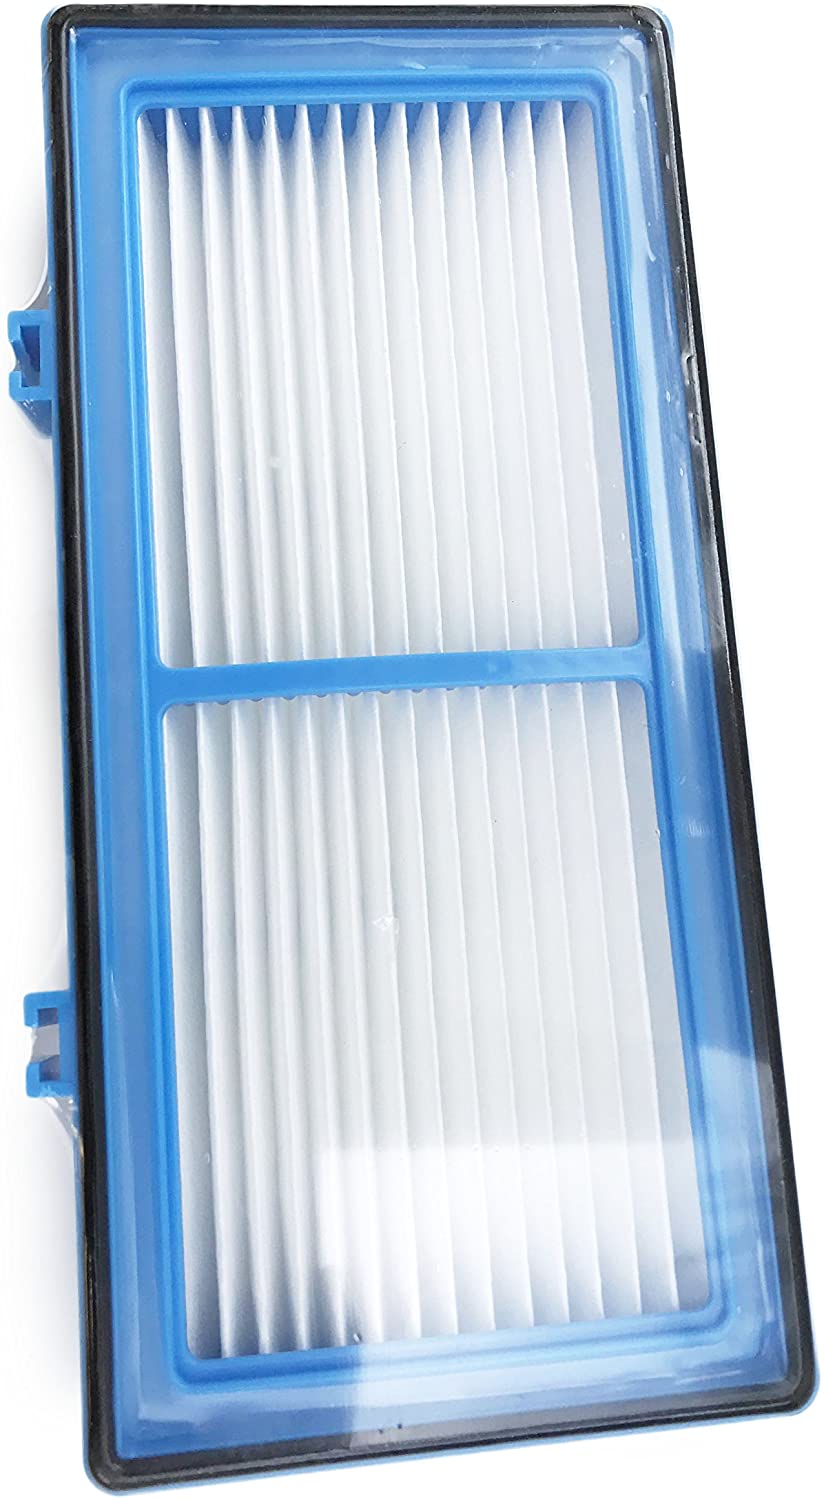 NISPIRA RNAB07B4W85Q7 nispira true hepa air filter with carbon pre filter  replacement compatible with levoit air purifiers lv-h132. compared to par